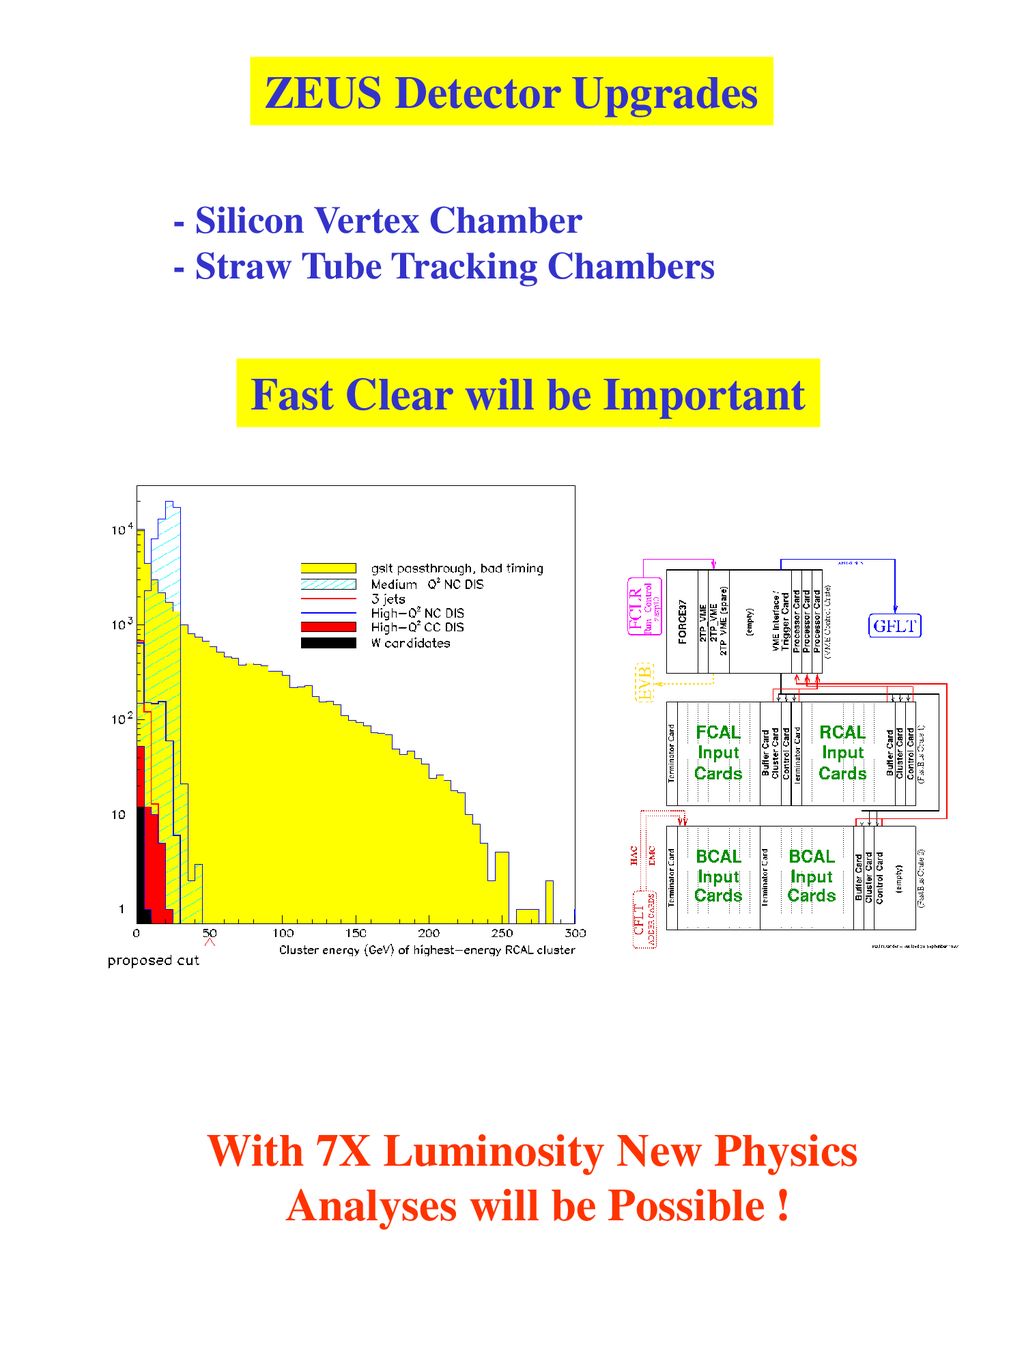 With 7X Luminosity New Physics Analyses will be Possible !